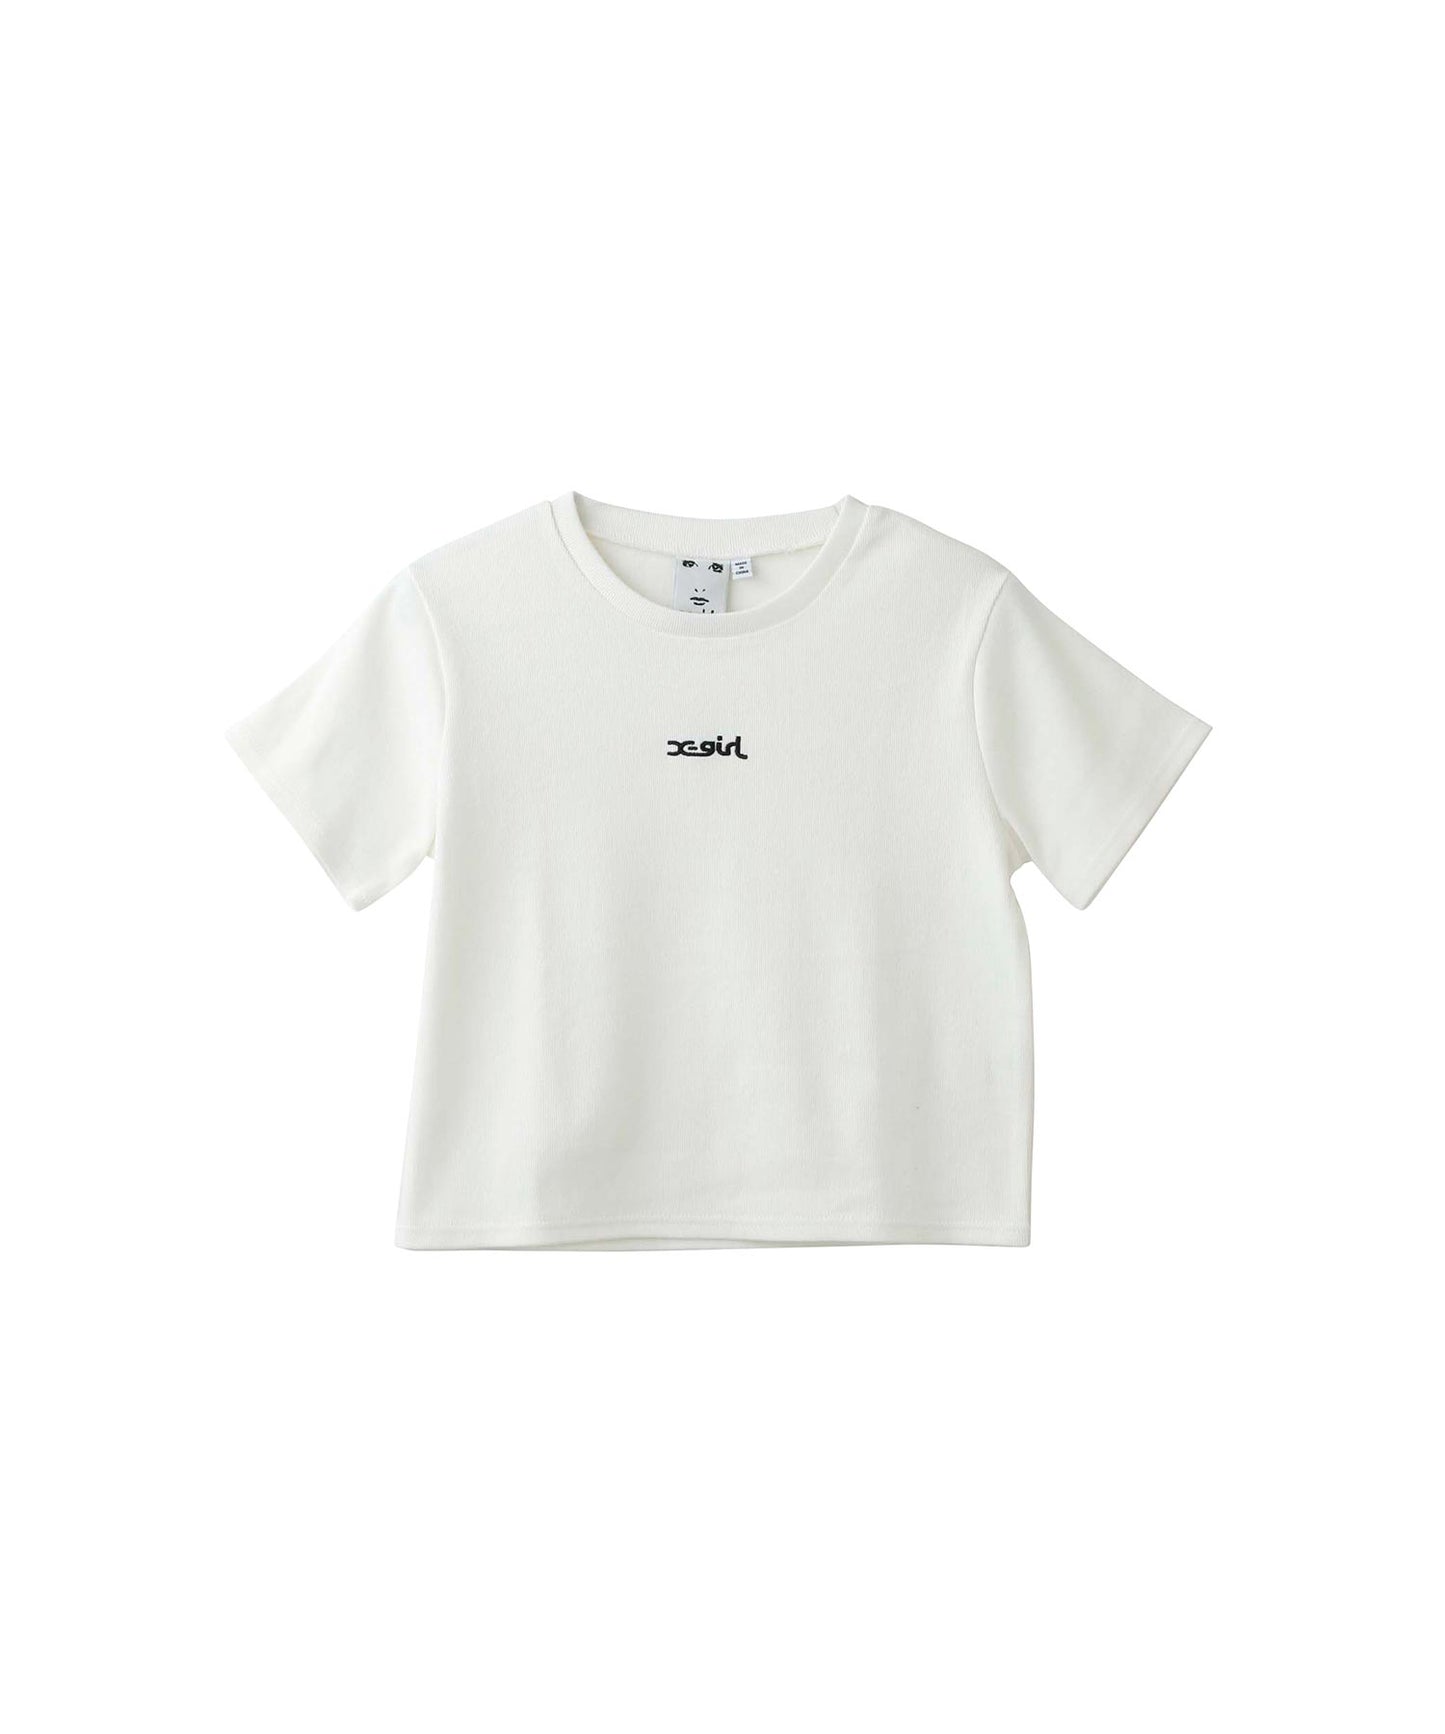 EMBROIDERED MILLS LOGO S/S BABY TEE